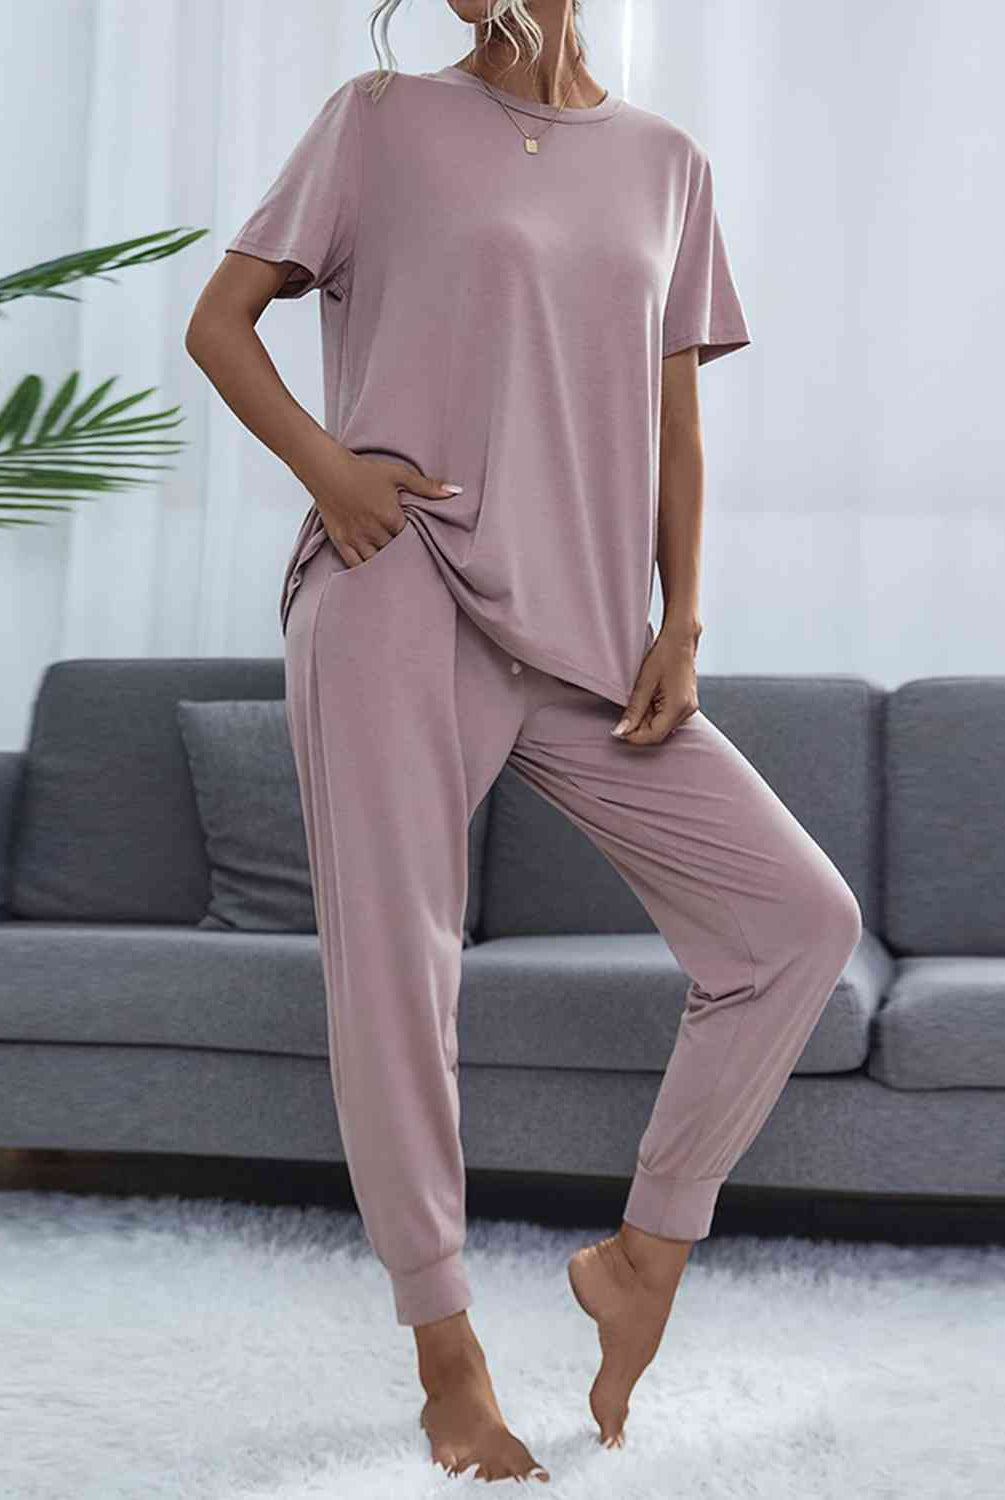 Gray Round Neck Short Sleeve Top and Pants Set Loungewear